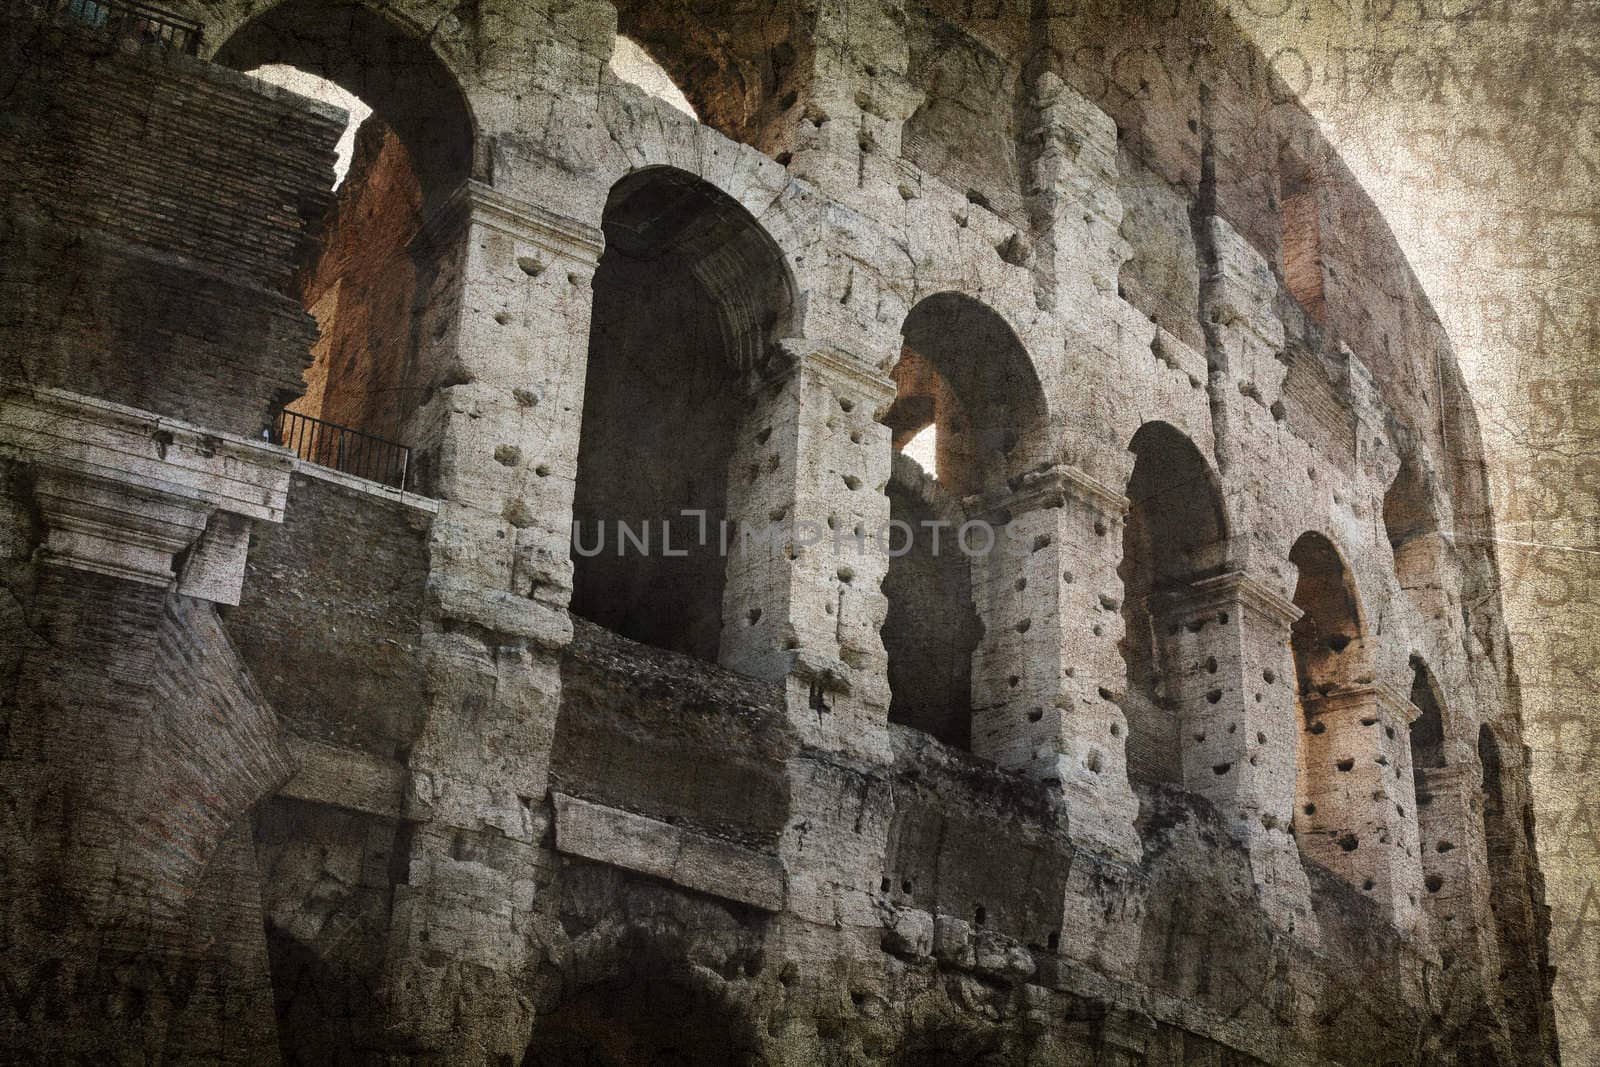 Detail of Colosseum - Rome, Italy. Postcard from Rome. More of my images worked together to reflect age and time.